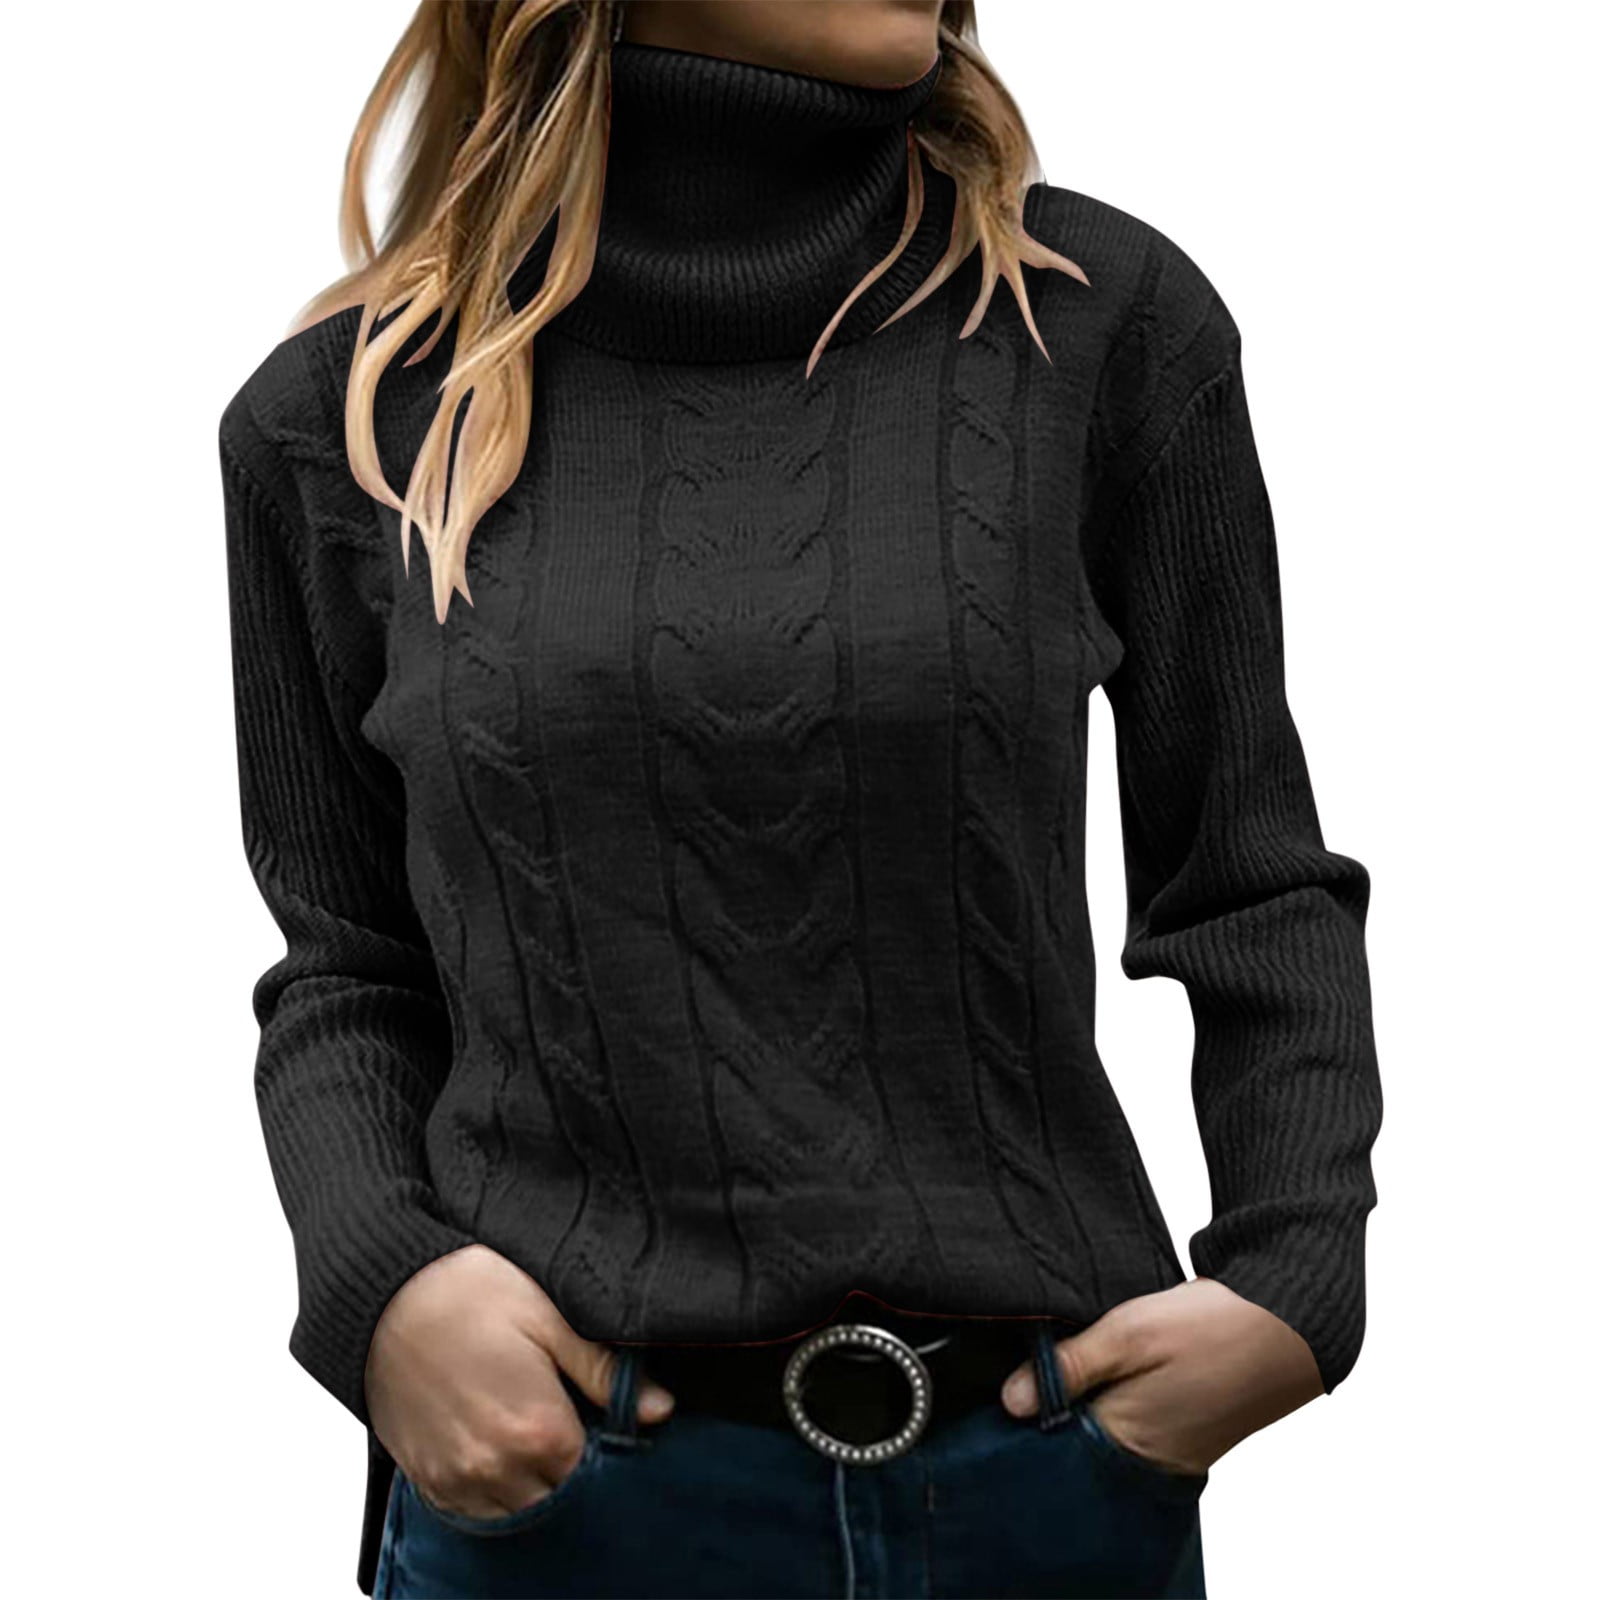 Black Crochet Sweater Women's Cardigan Sweaters Hippie Sweaters Tie Front  Crop Top Cute Small Business Stuff Under 10 Dollar Clearance Items for  Women Under 10 Dollars Clothes for Women Fashion 2022 at